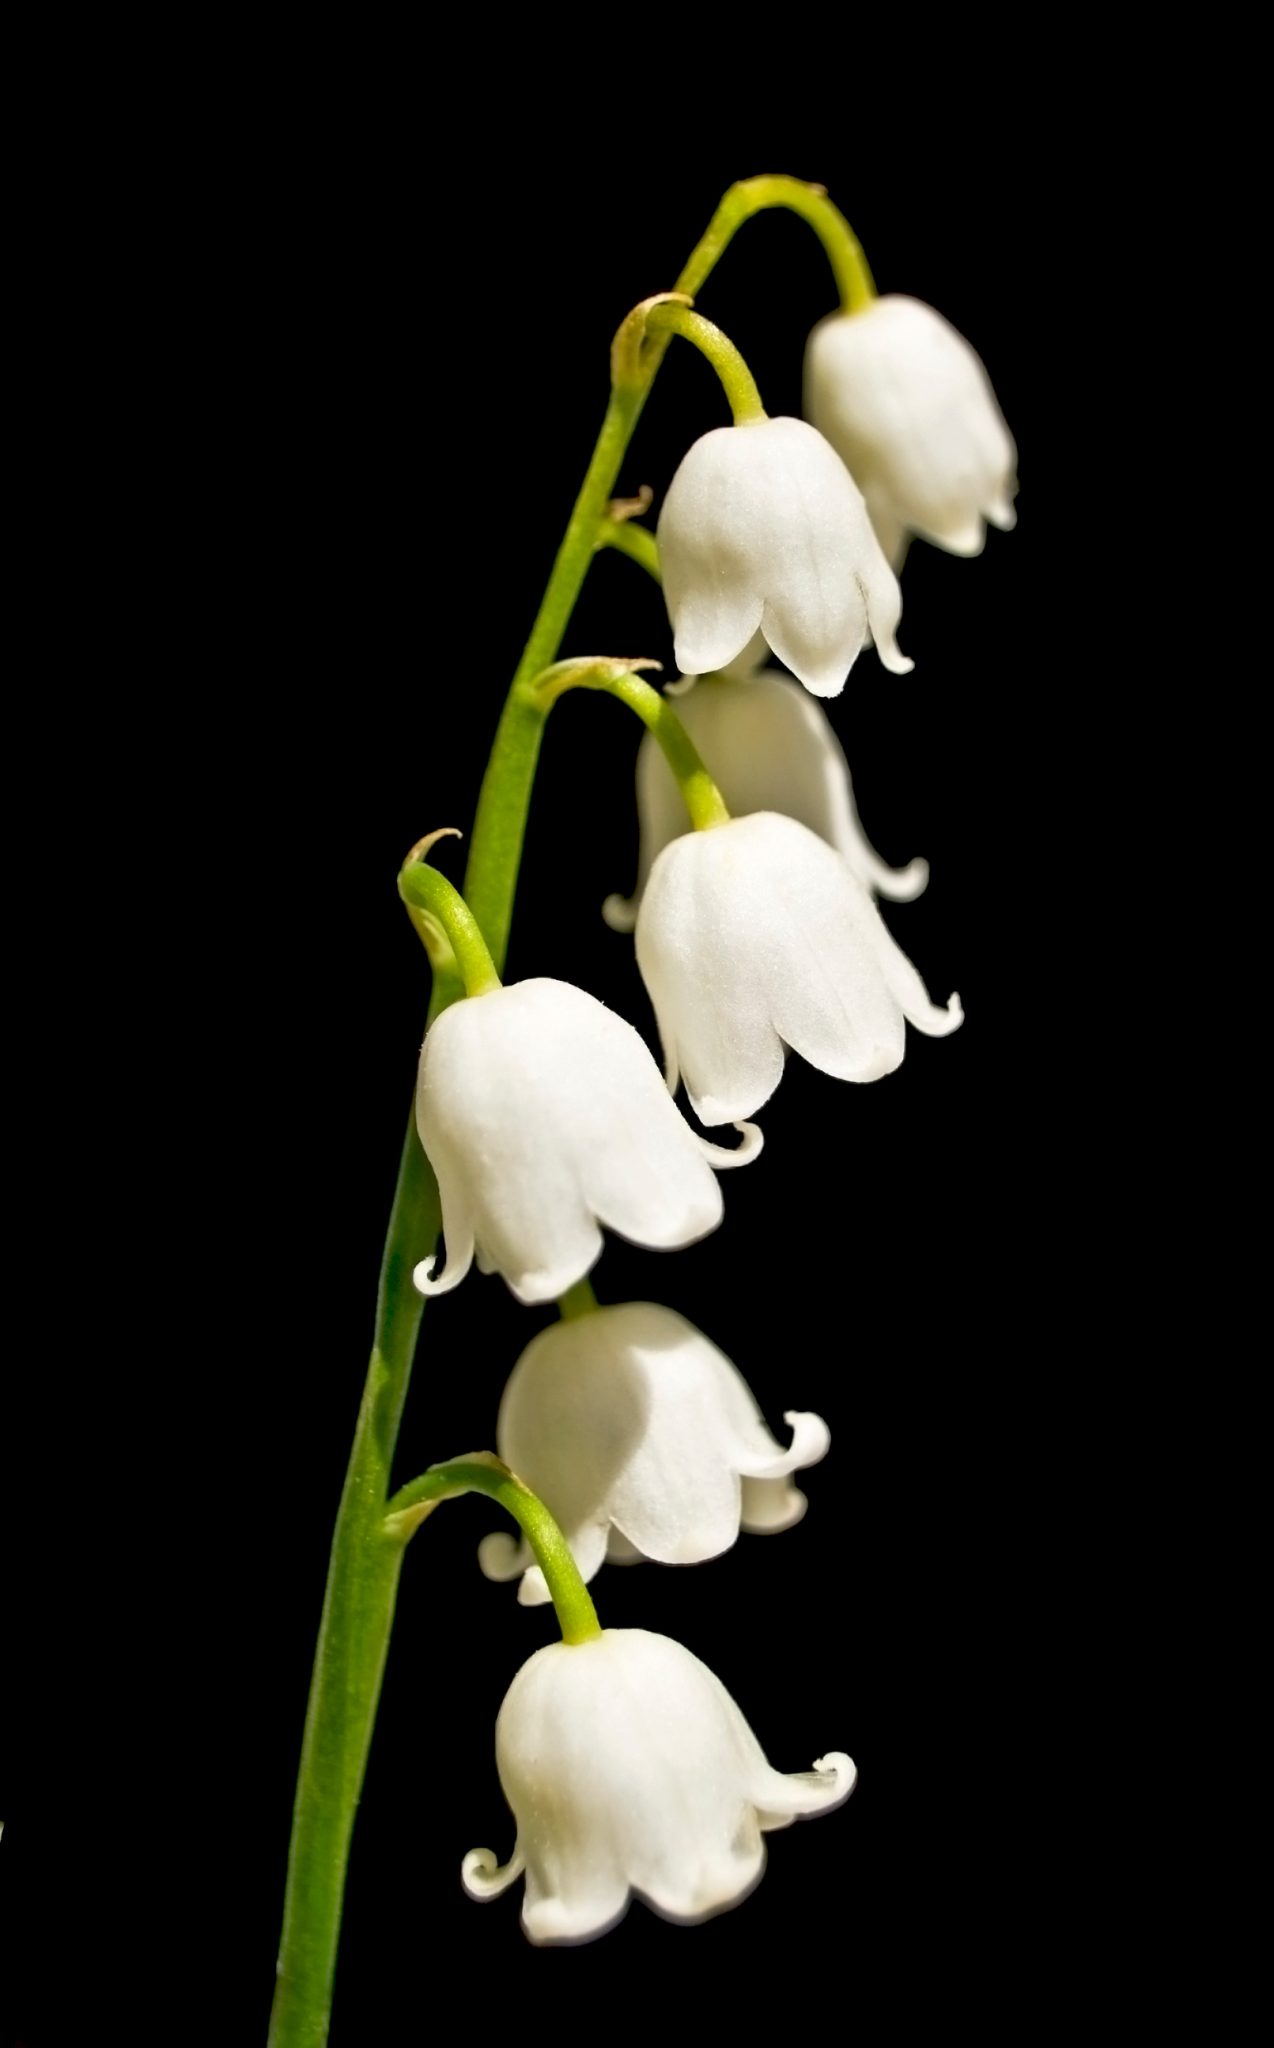 White Lily of the Valley (25 stems)